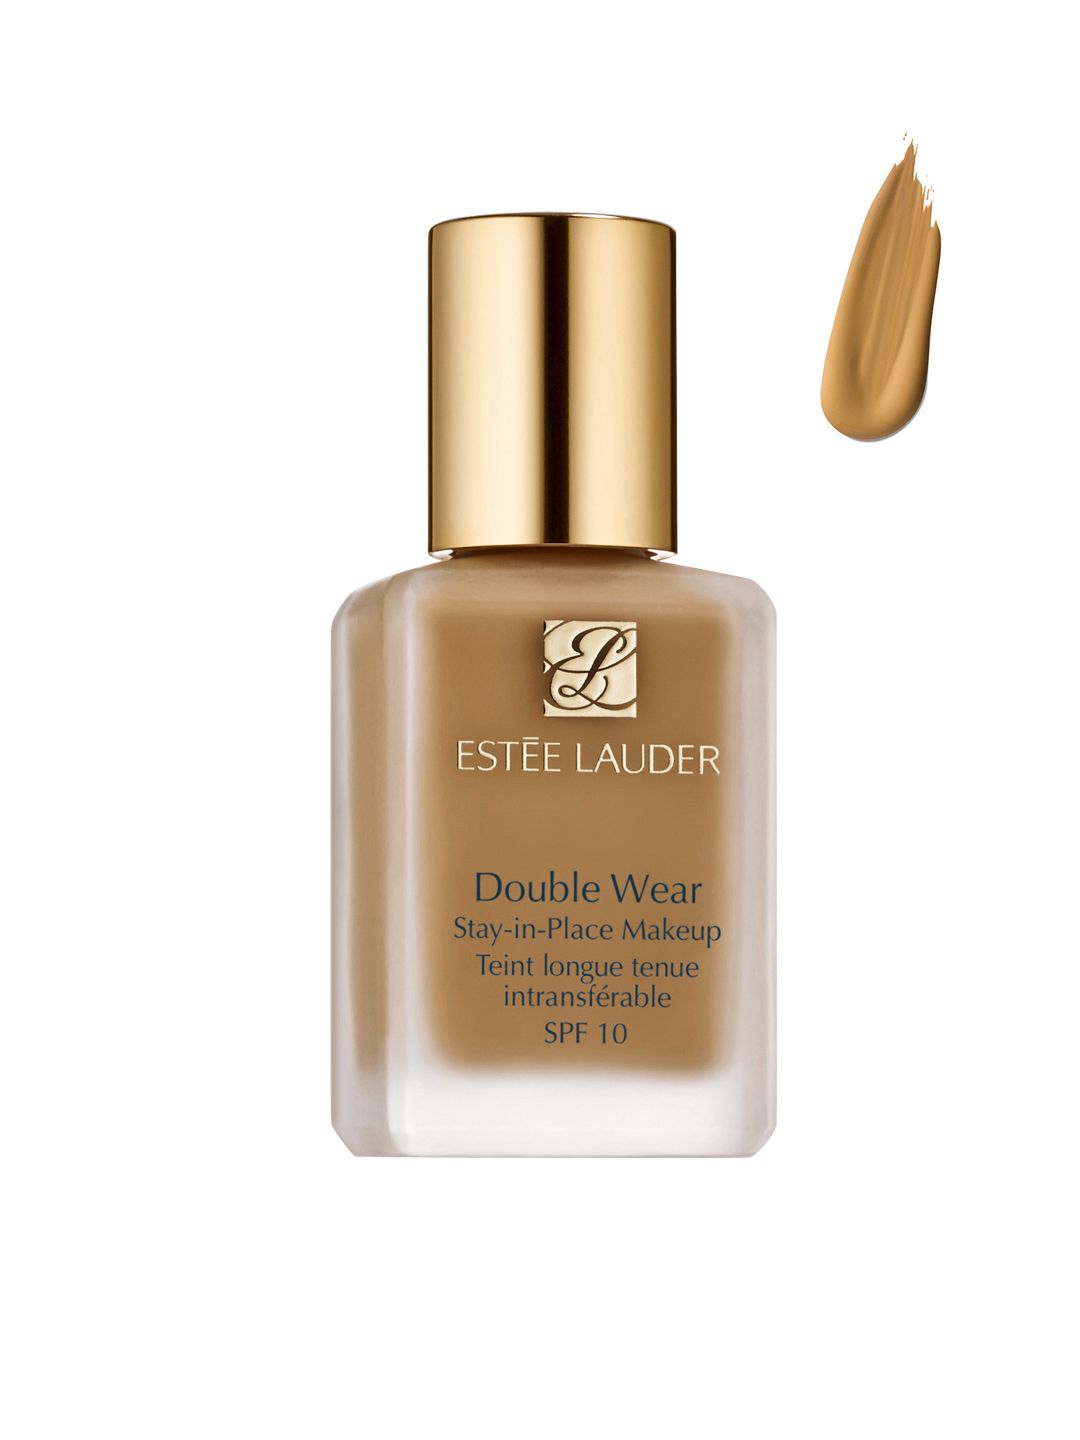 Estee Lauder Ivory Beige Double Wear Stay-in-Place Makeup with SPF 10 Price in India